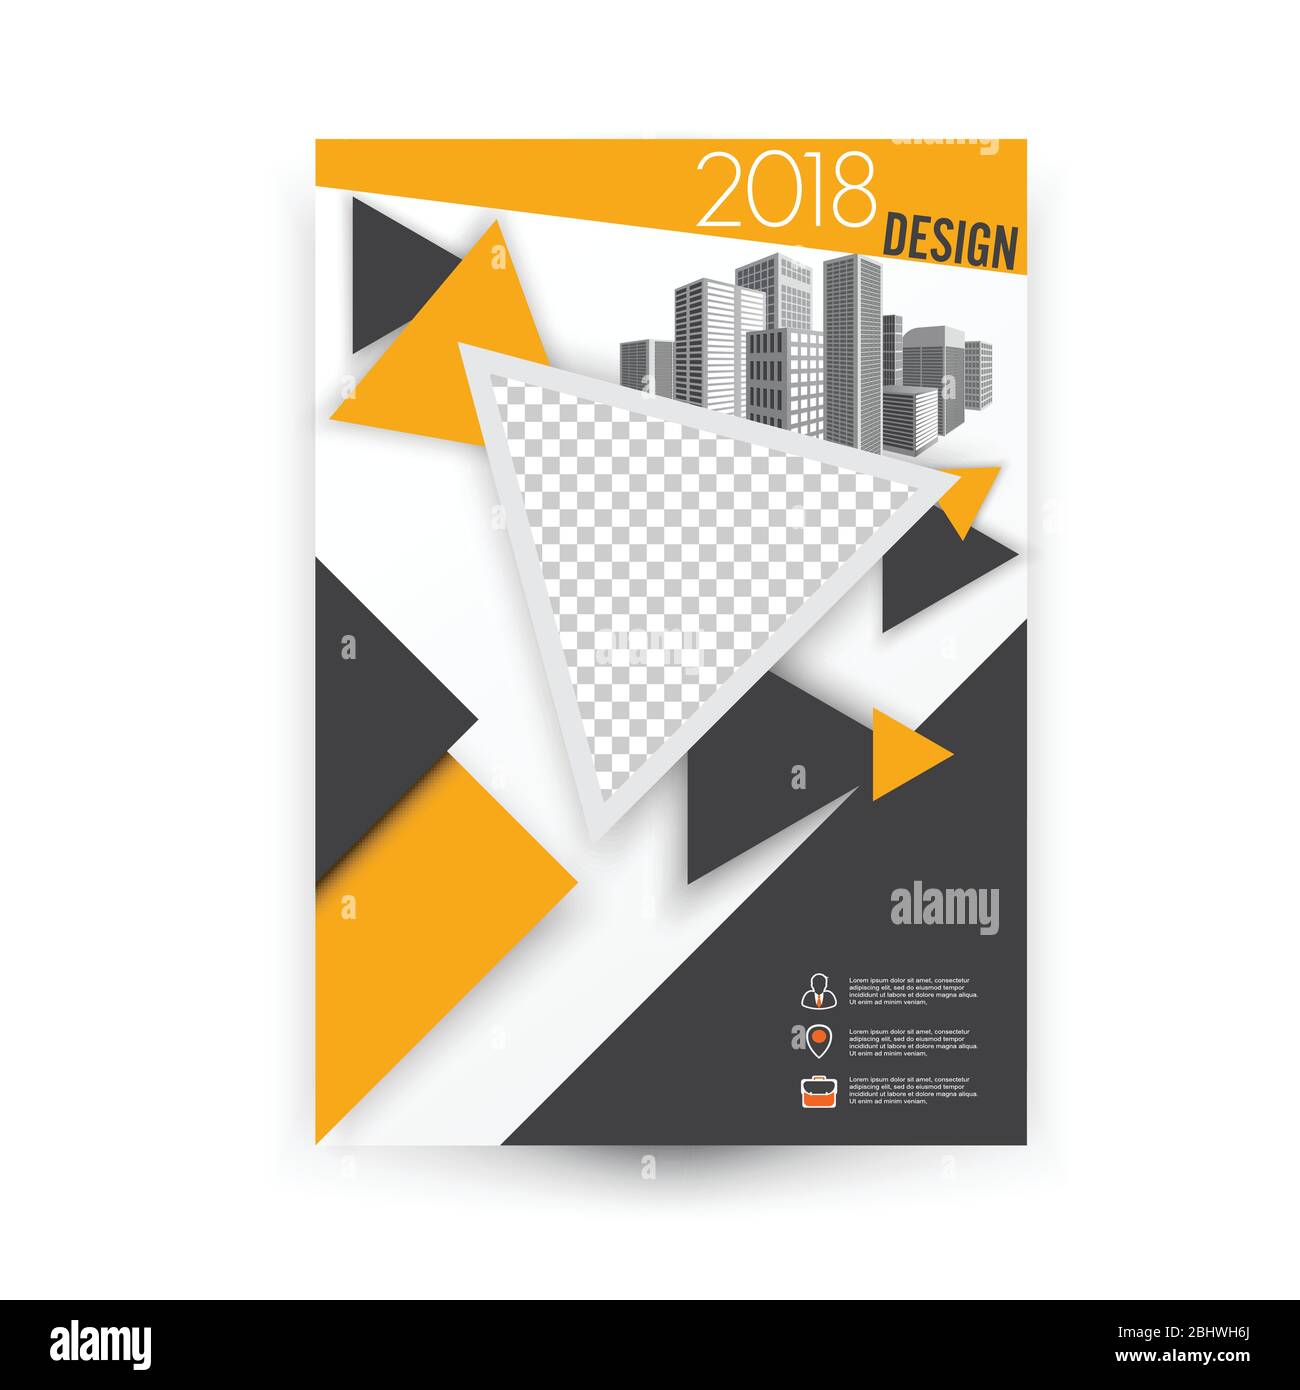 Design cover poster A4 catalog book brochure flyer layout annual report business template. Can be used for magazine cover, business mockup, education, Stock Vector